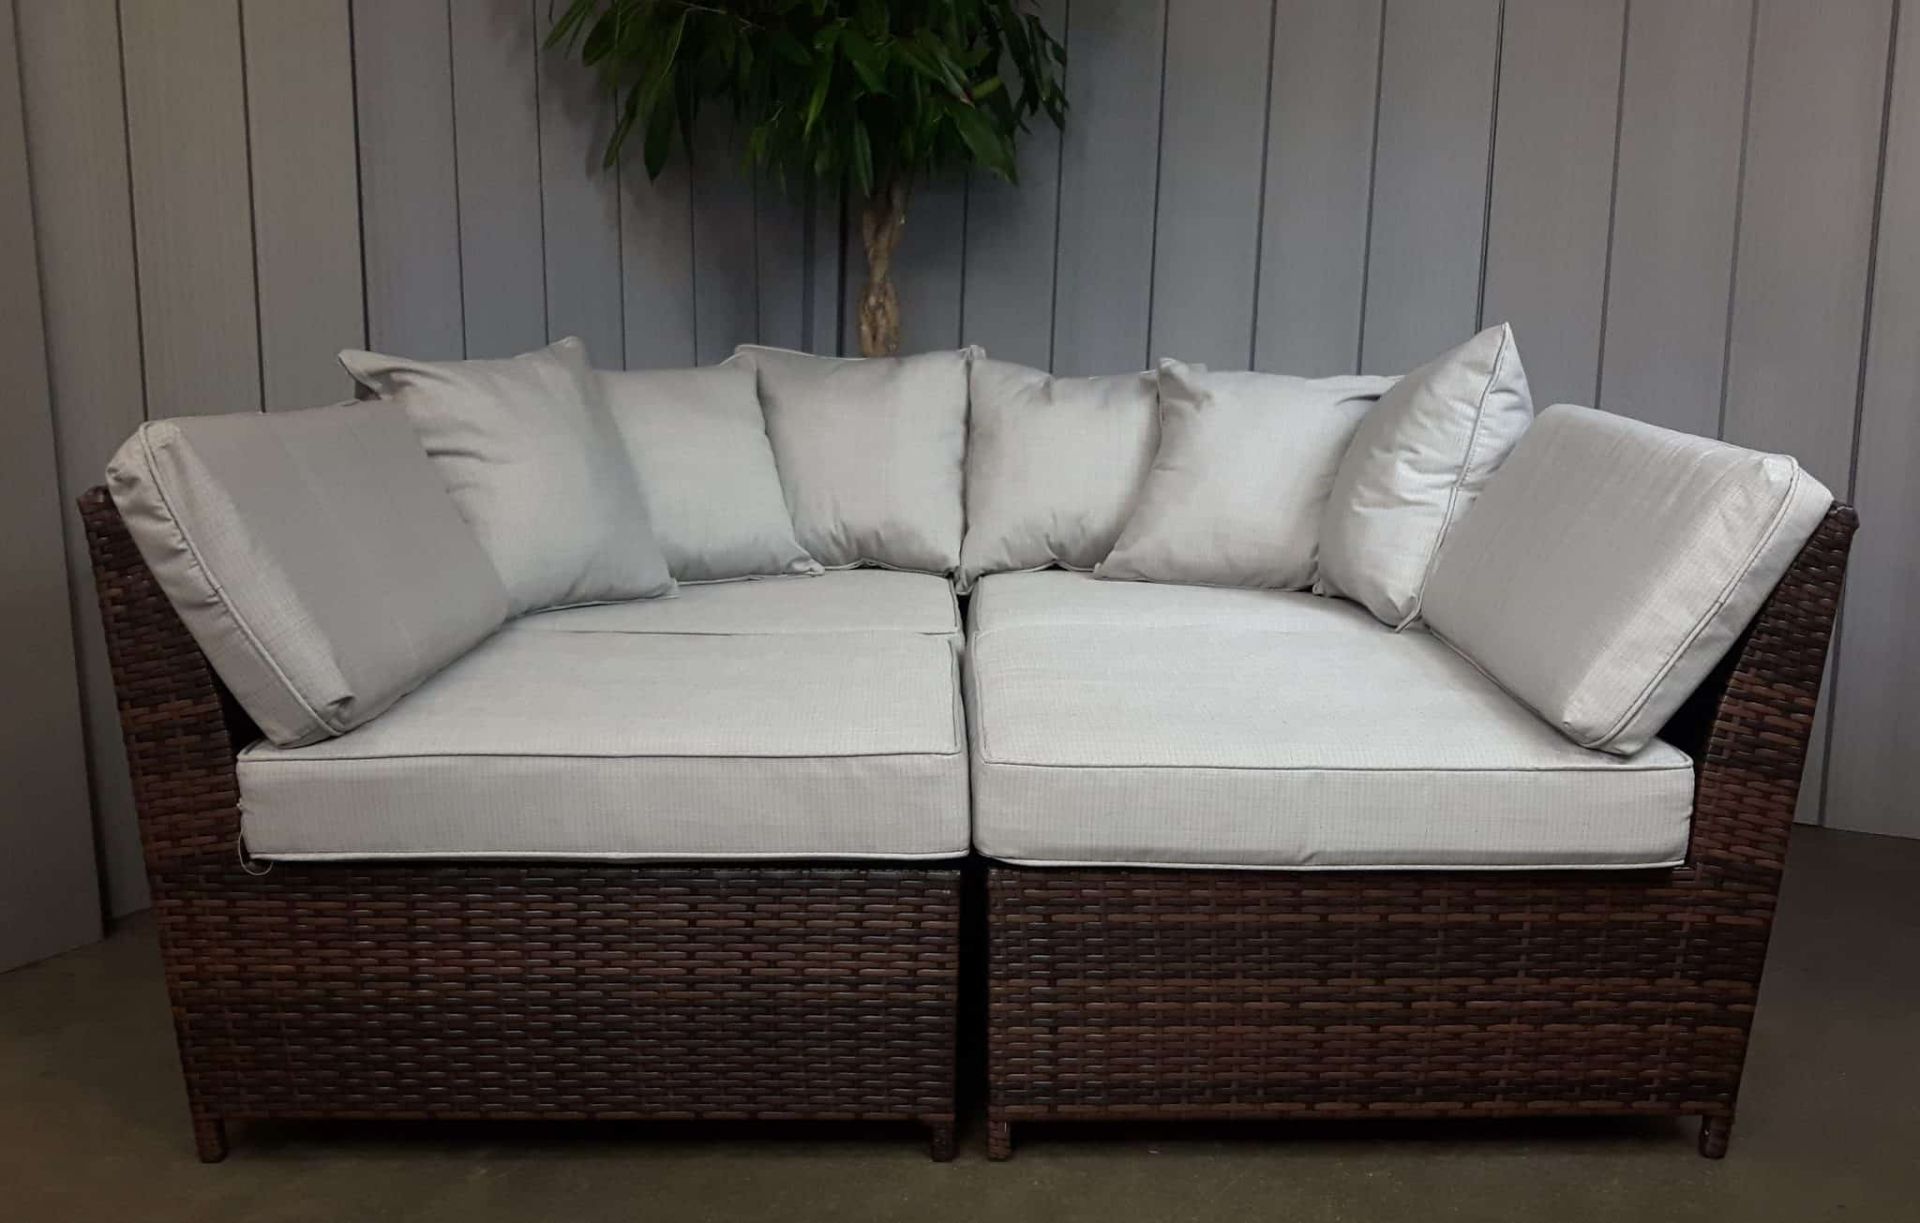 Miami Multi Use Daybed / Corner Sofa Set Ready To Use - Image 6 of 6